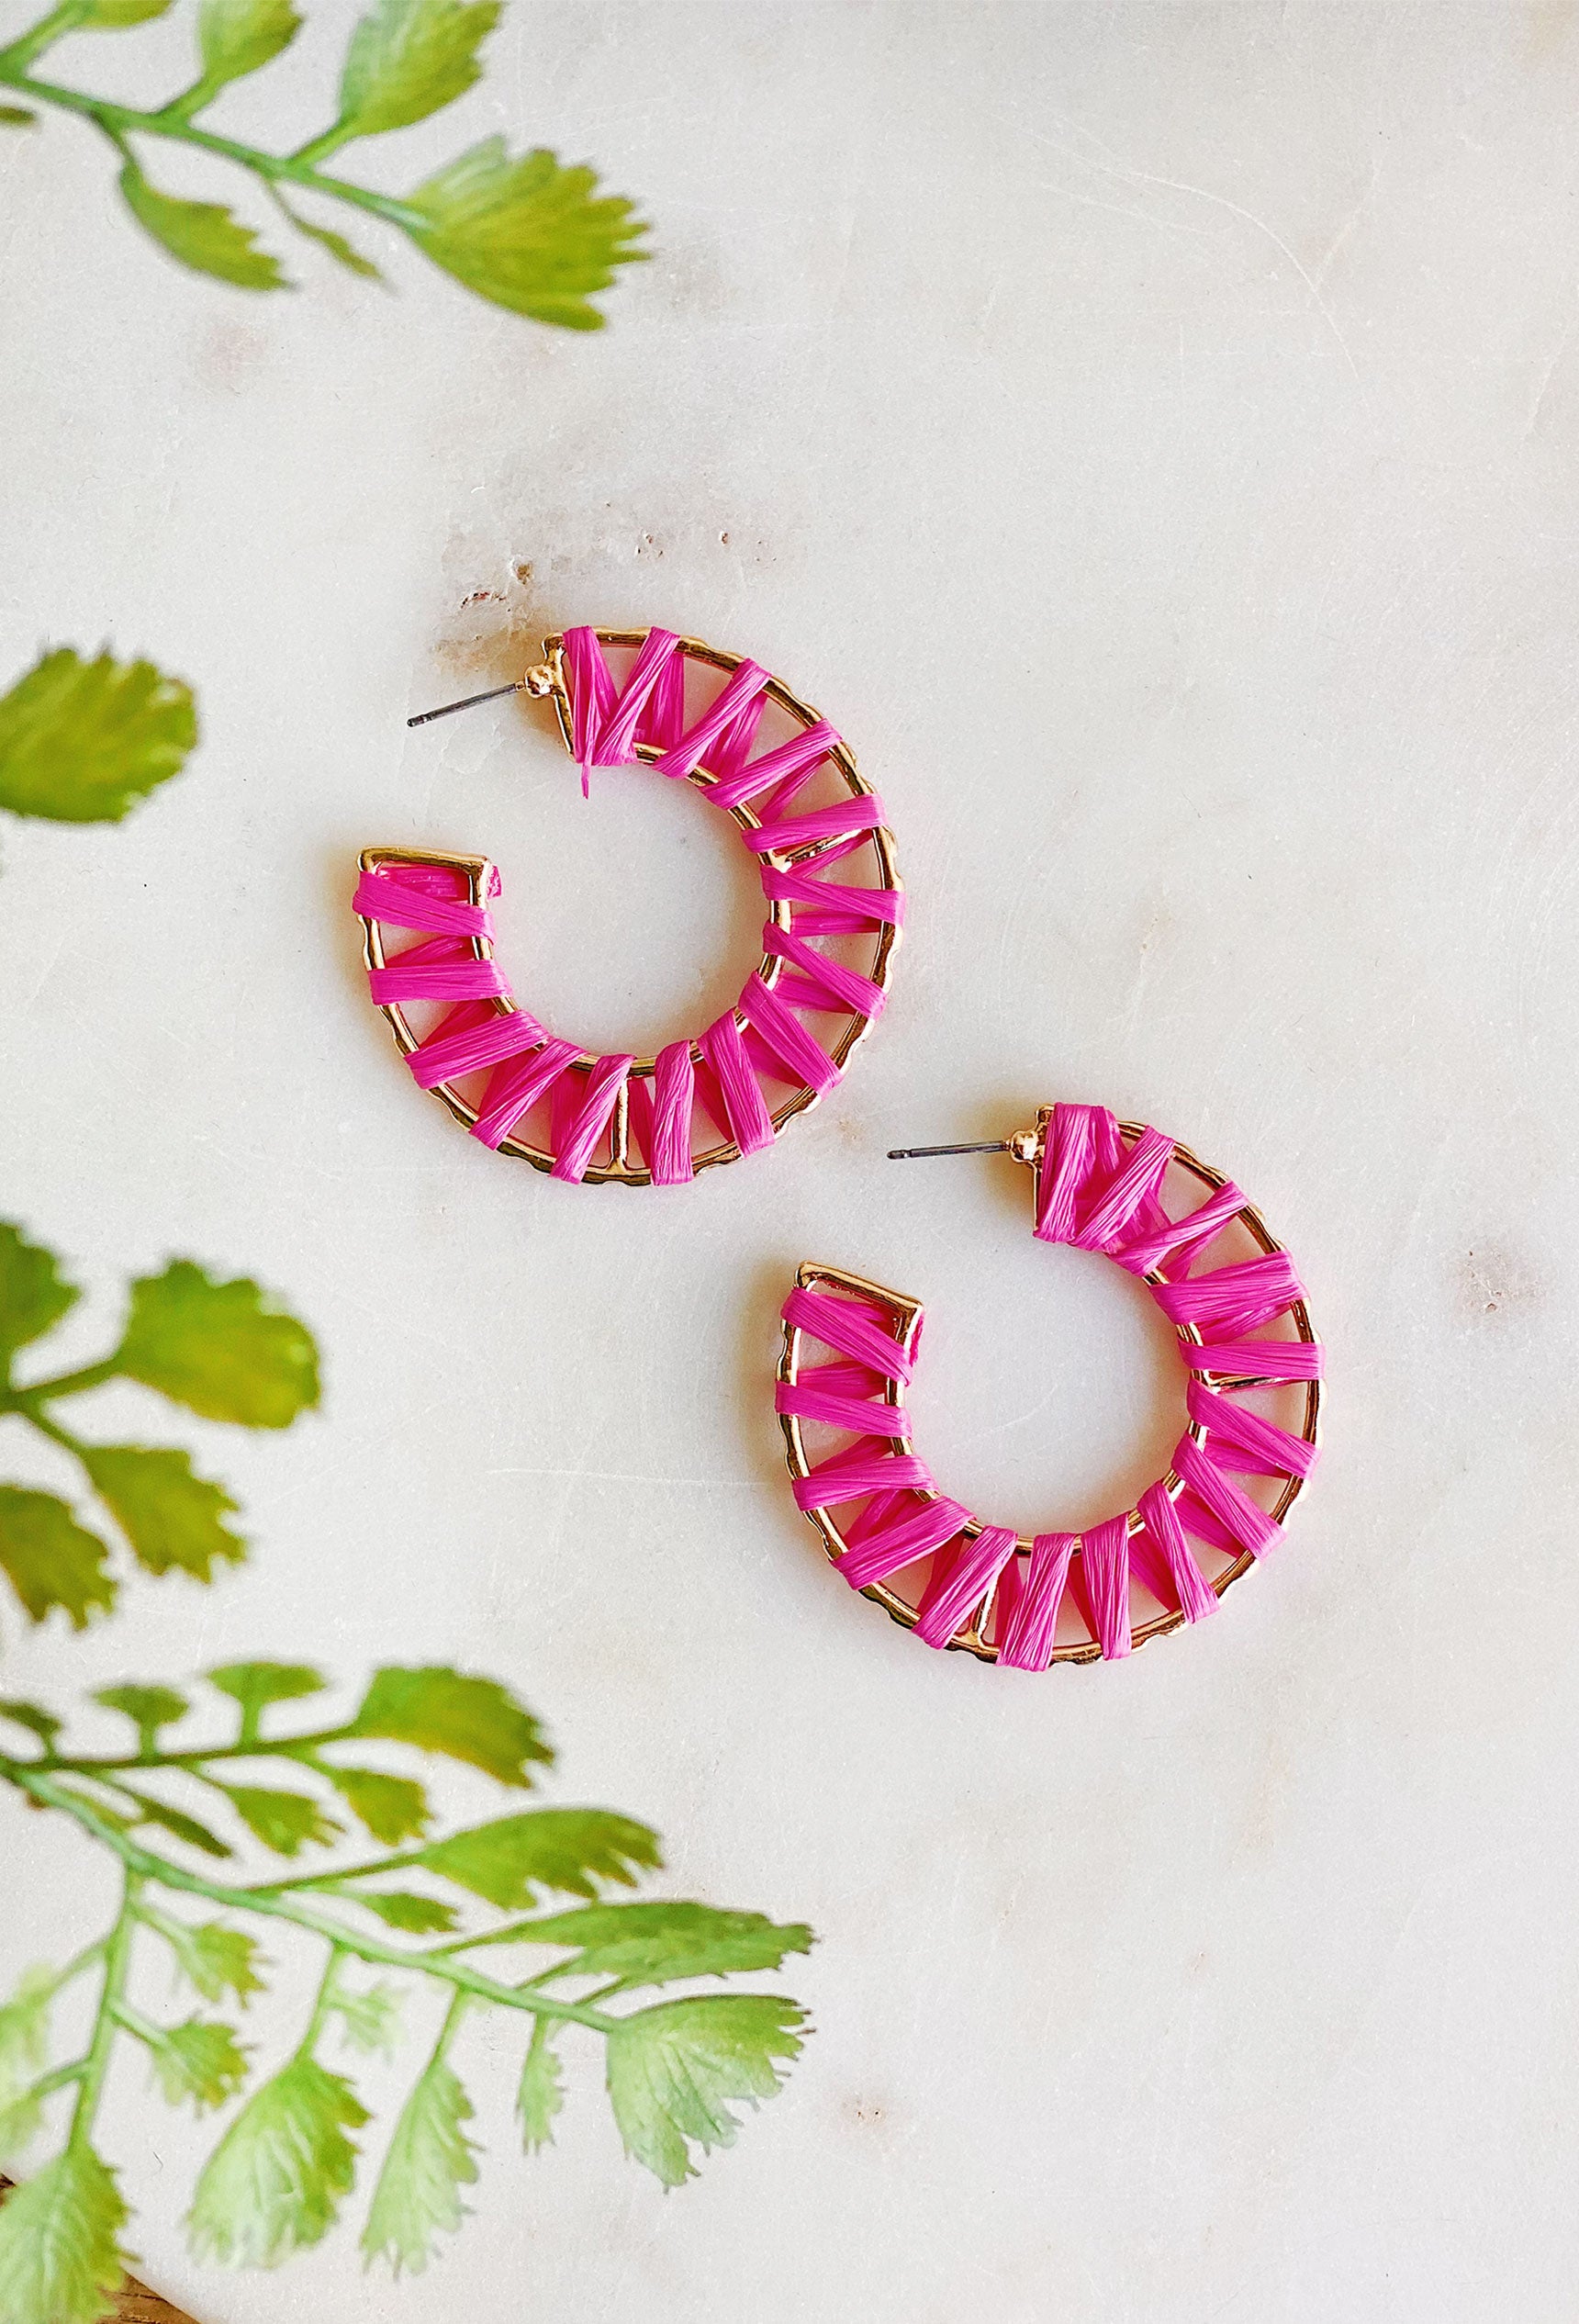 Heading To Paradise Earrings, gold hoops wrapped in pink 